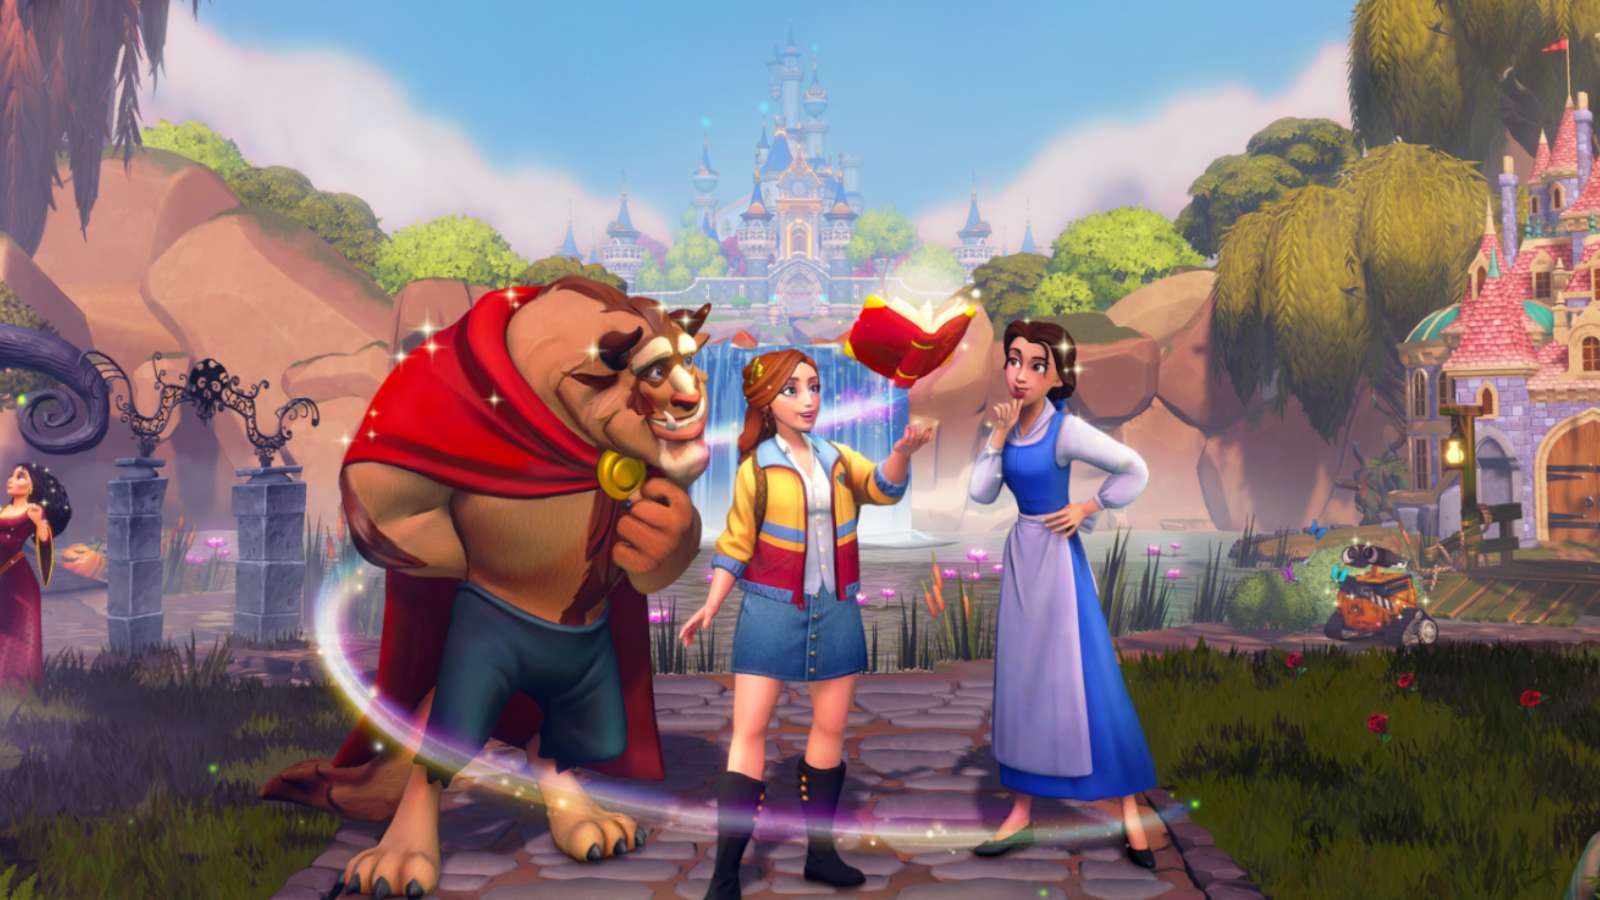 Disney Dreamlight Valley load screen with Belle and the Beast